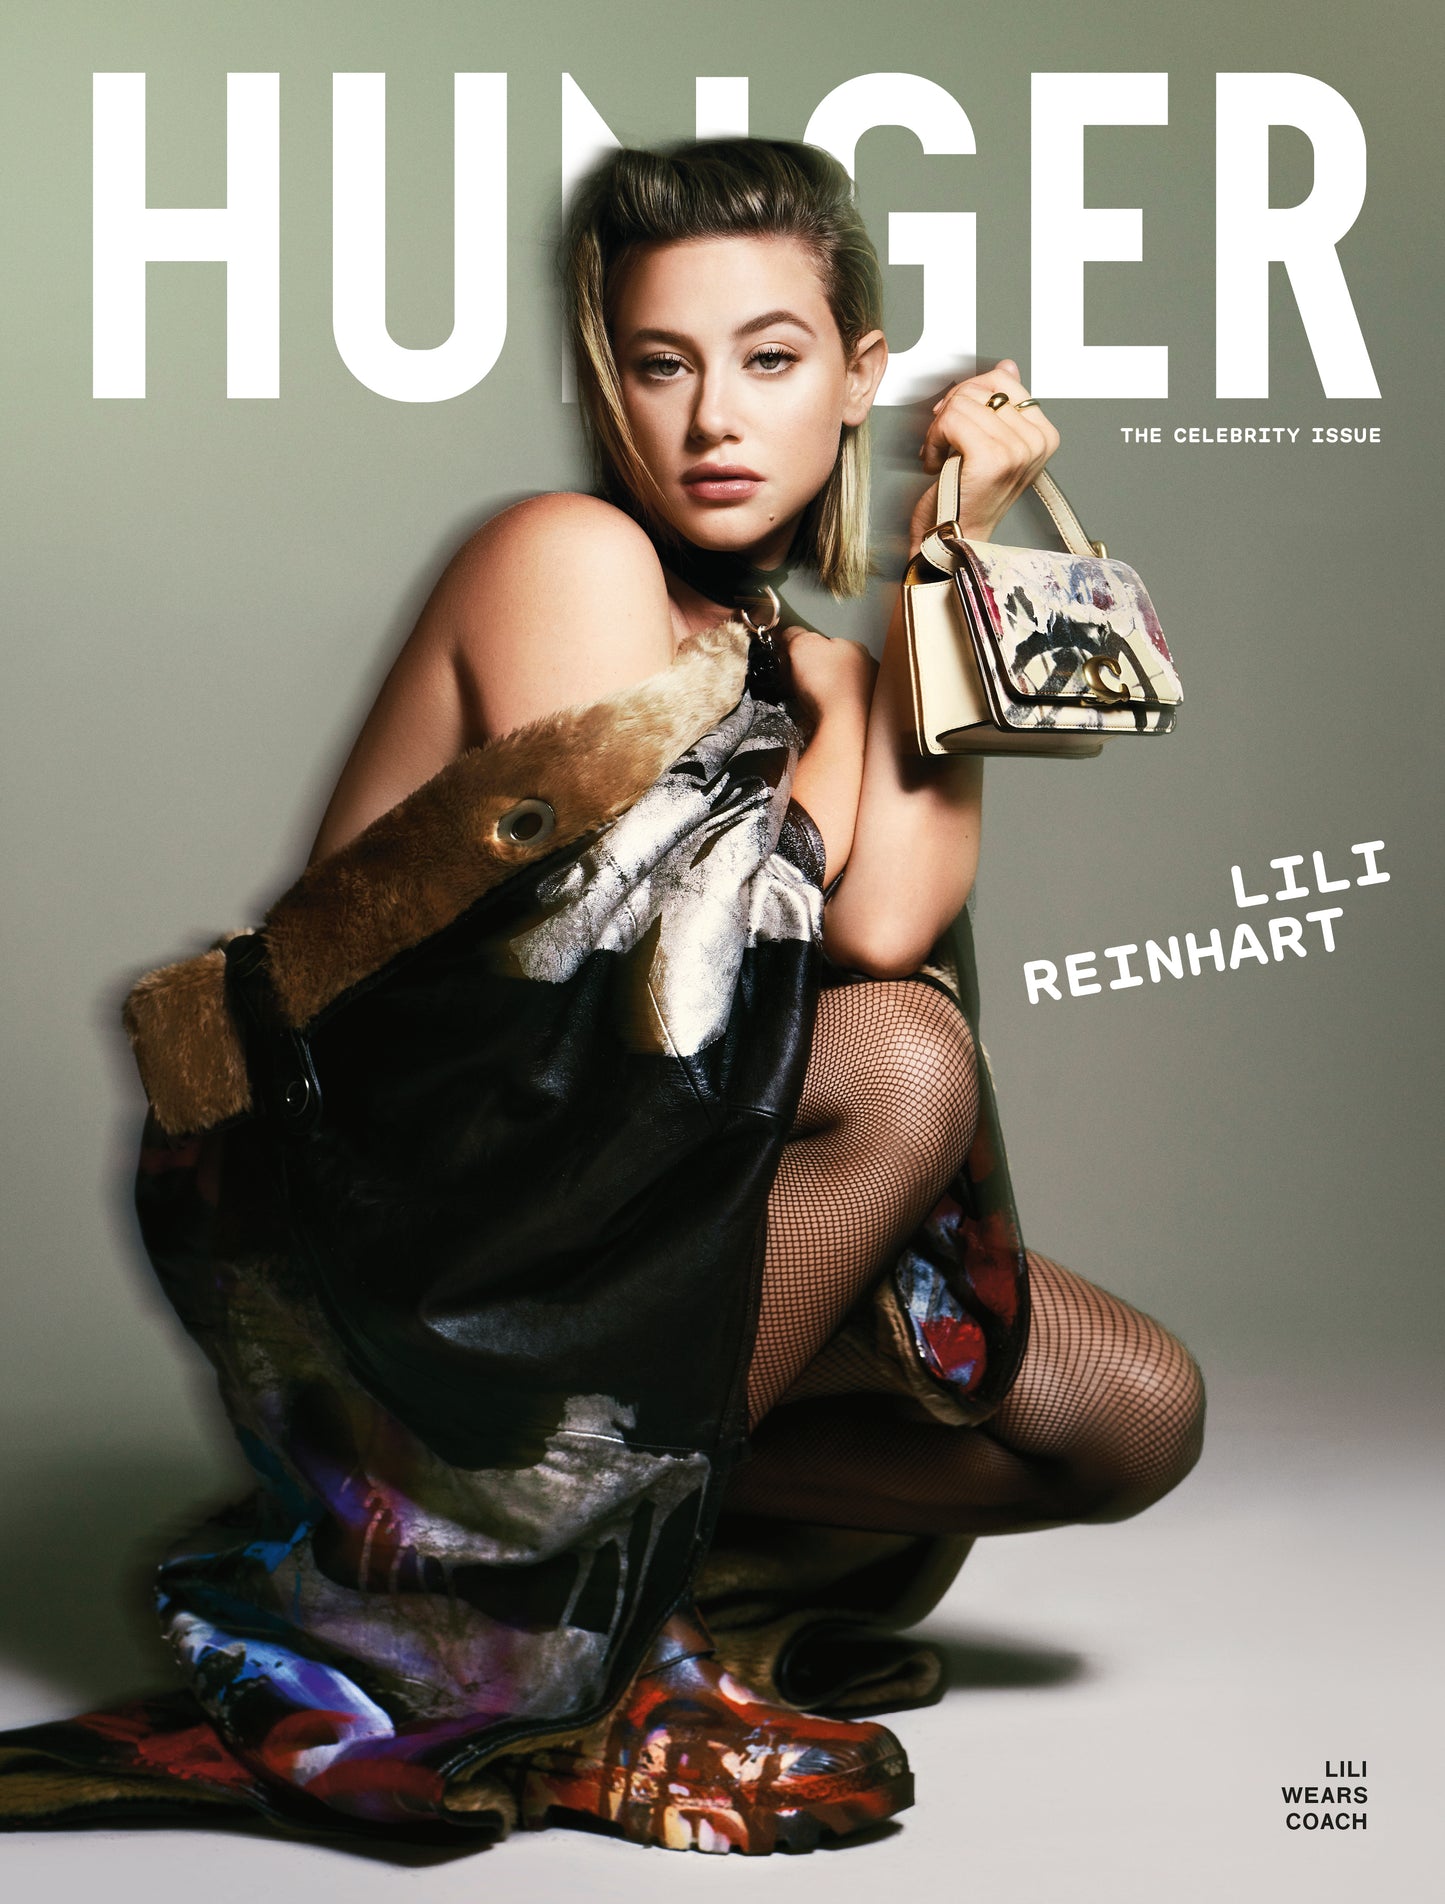 Lili Reinhart covers The Celebrity issue in Coach